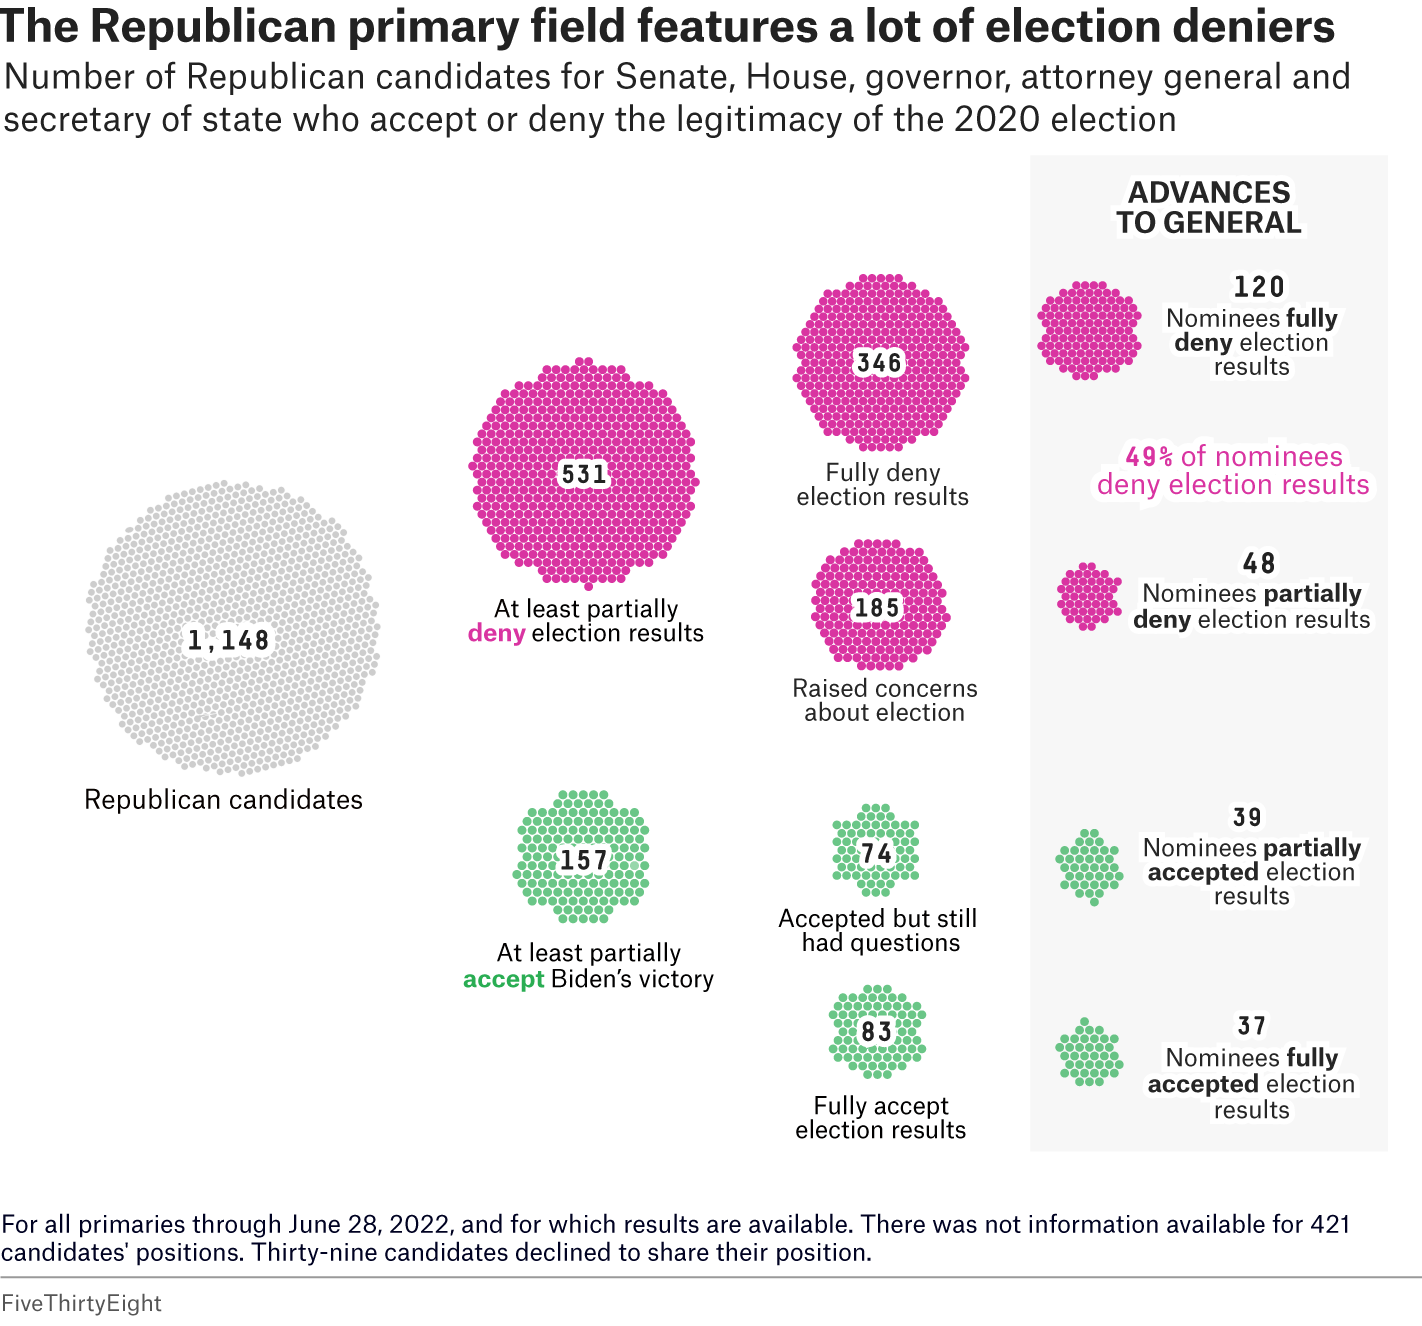 Large circles made up of dots show how many candidates for Senate, House, governor, attorney general and secretary of state deny (531) or accept (157) the outcome of the 2020 election out of a total pool of 1,148. 